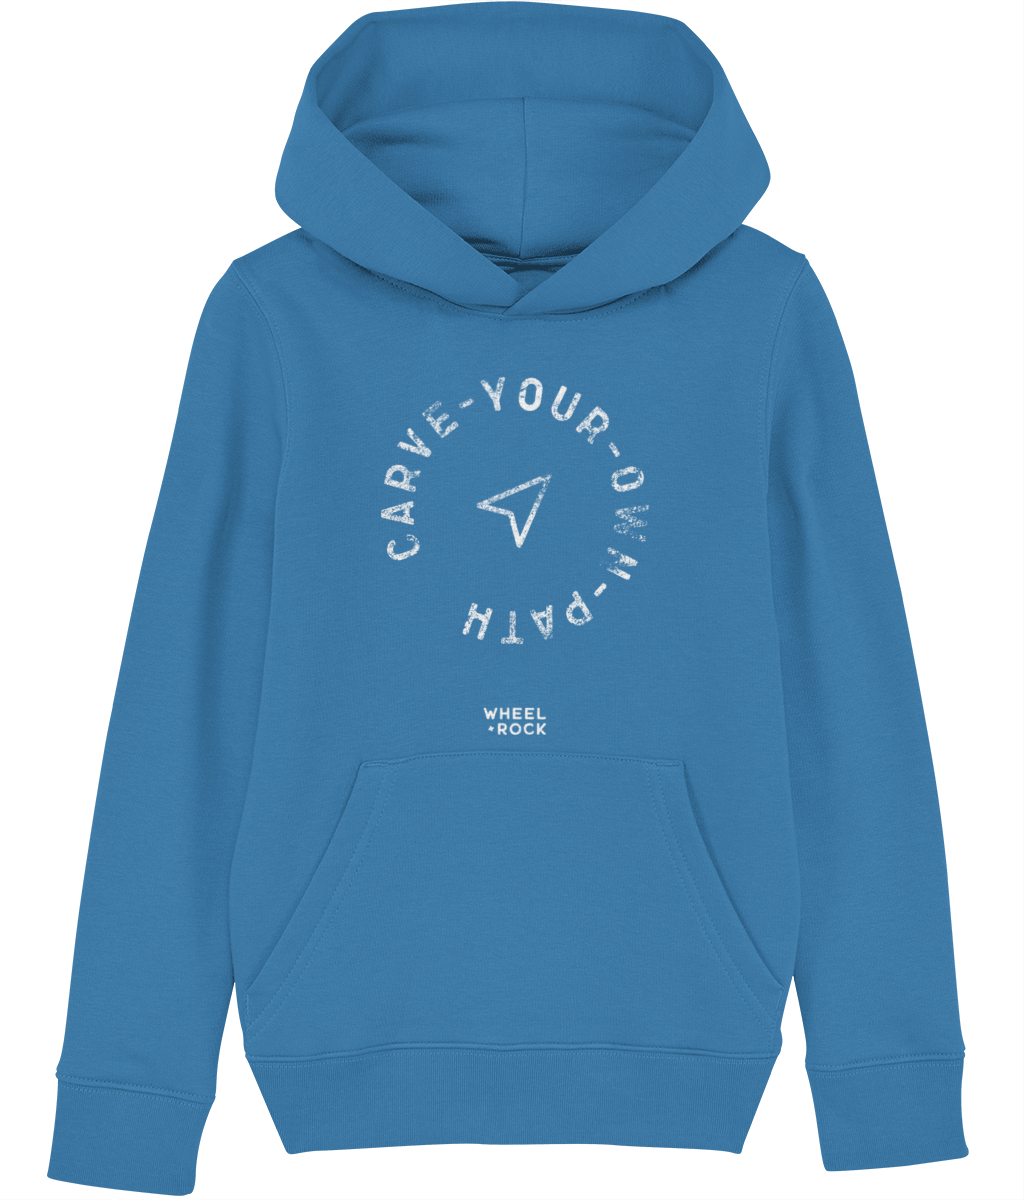 Carve Your Own Path - Kids Hoodie - BLUES